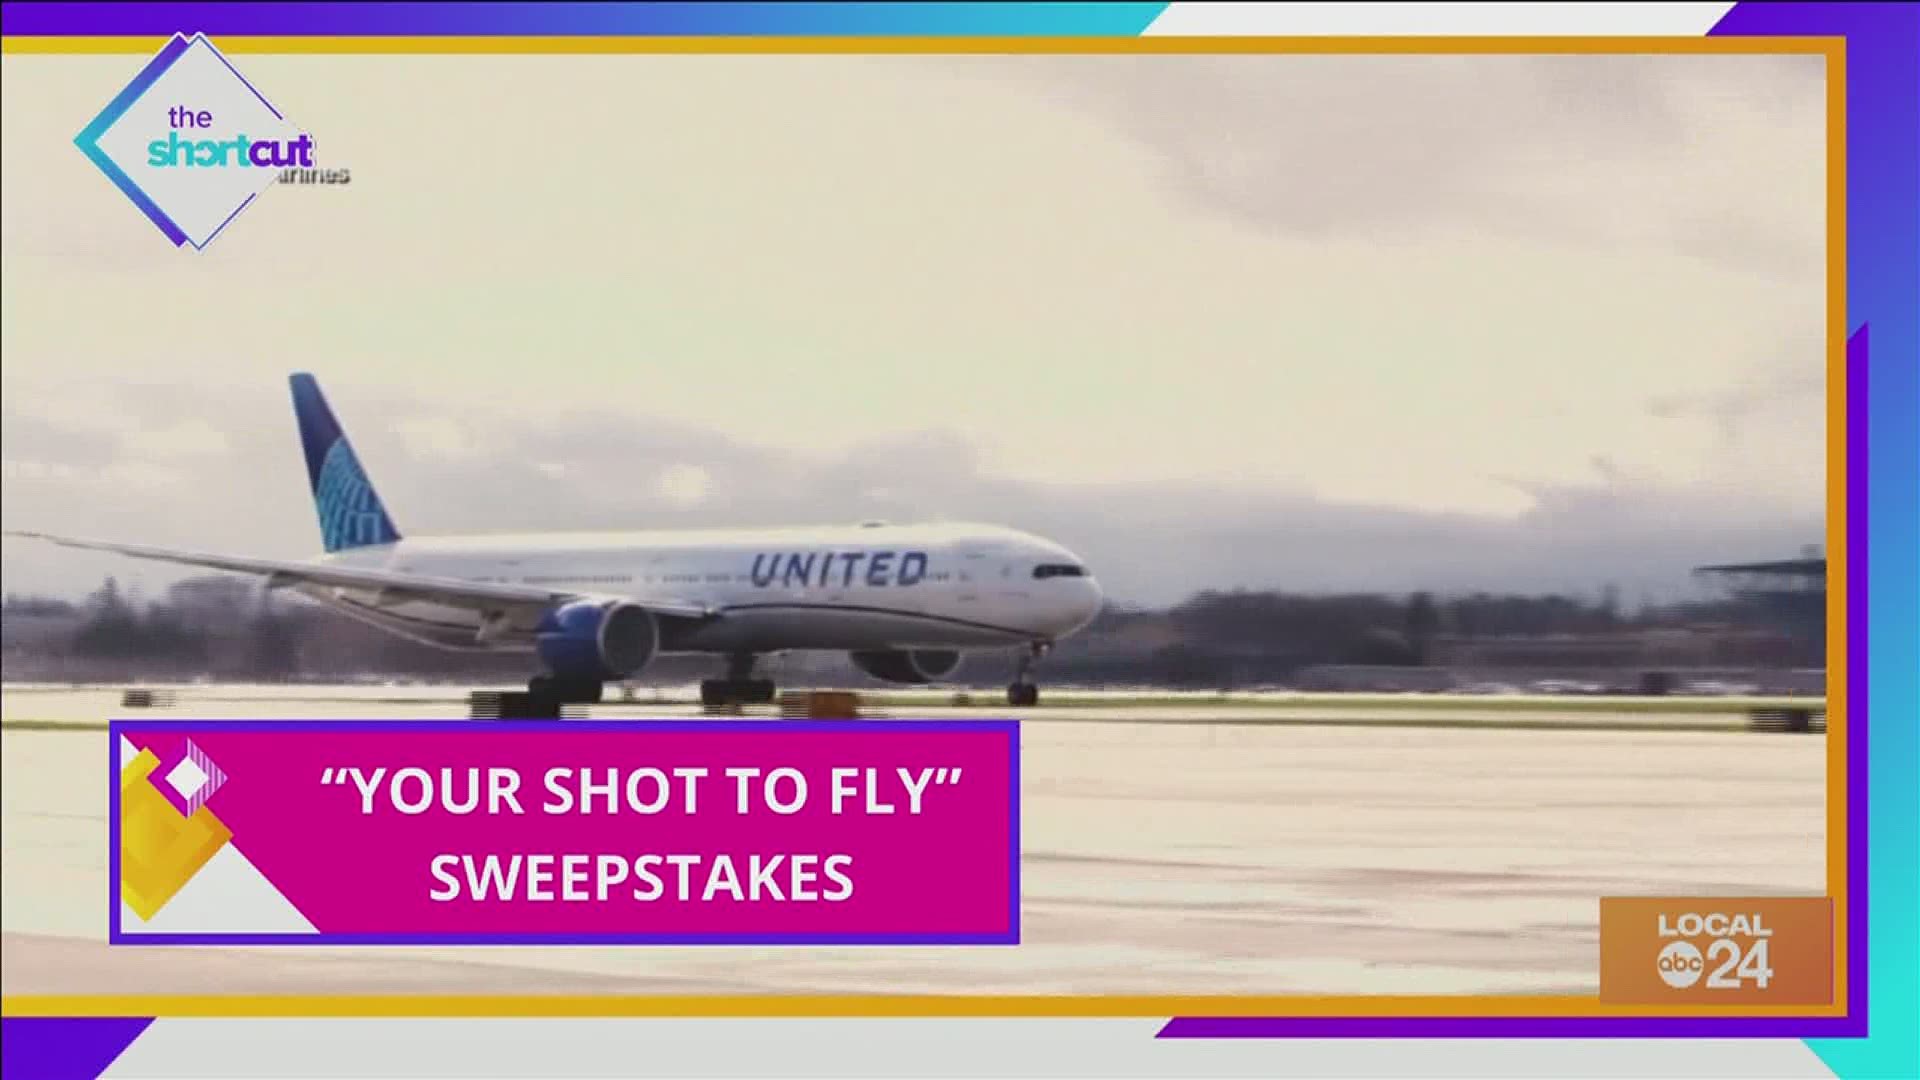 Join Sydney Neely as we take a closer look at United Airline's "Your Shot to Fly" sweepstakes! All that you need is your vaccine card and you'll be entered to win!